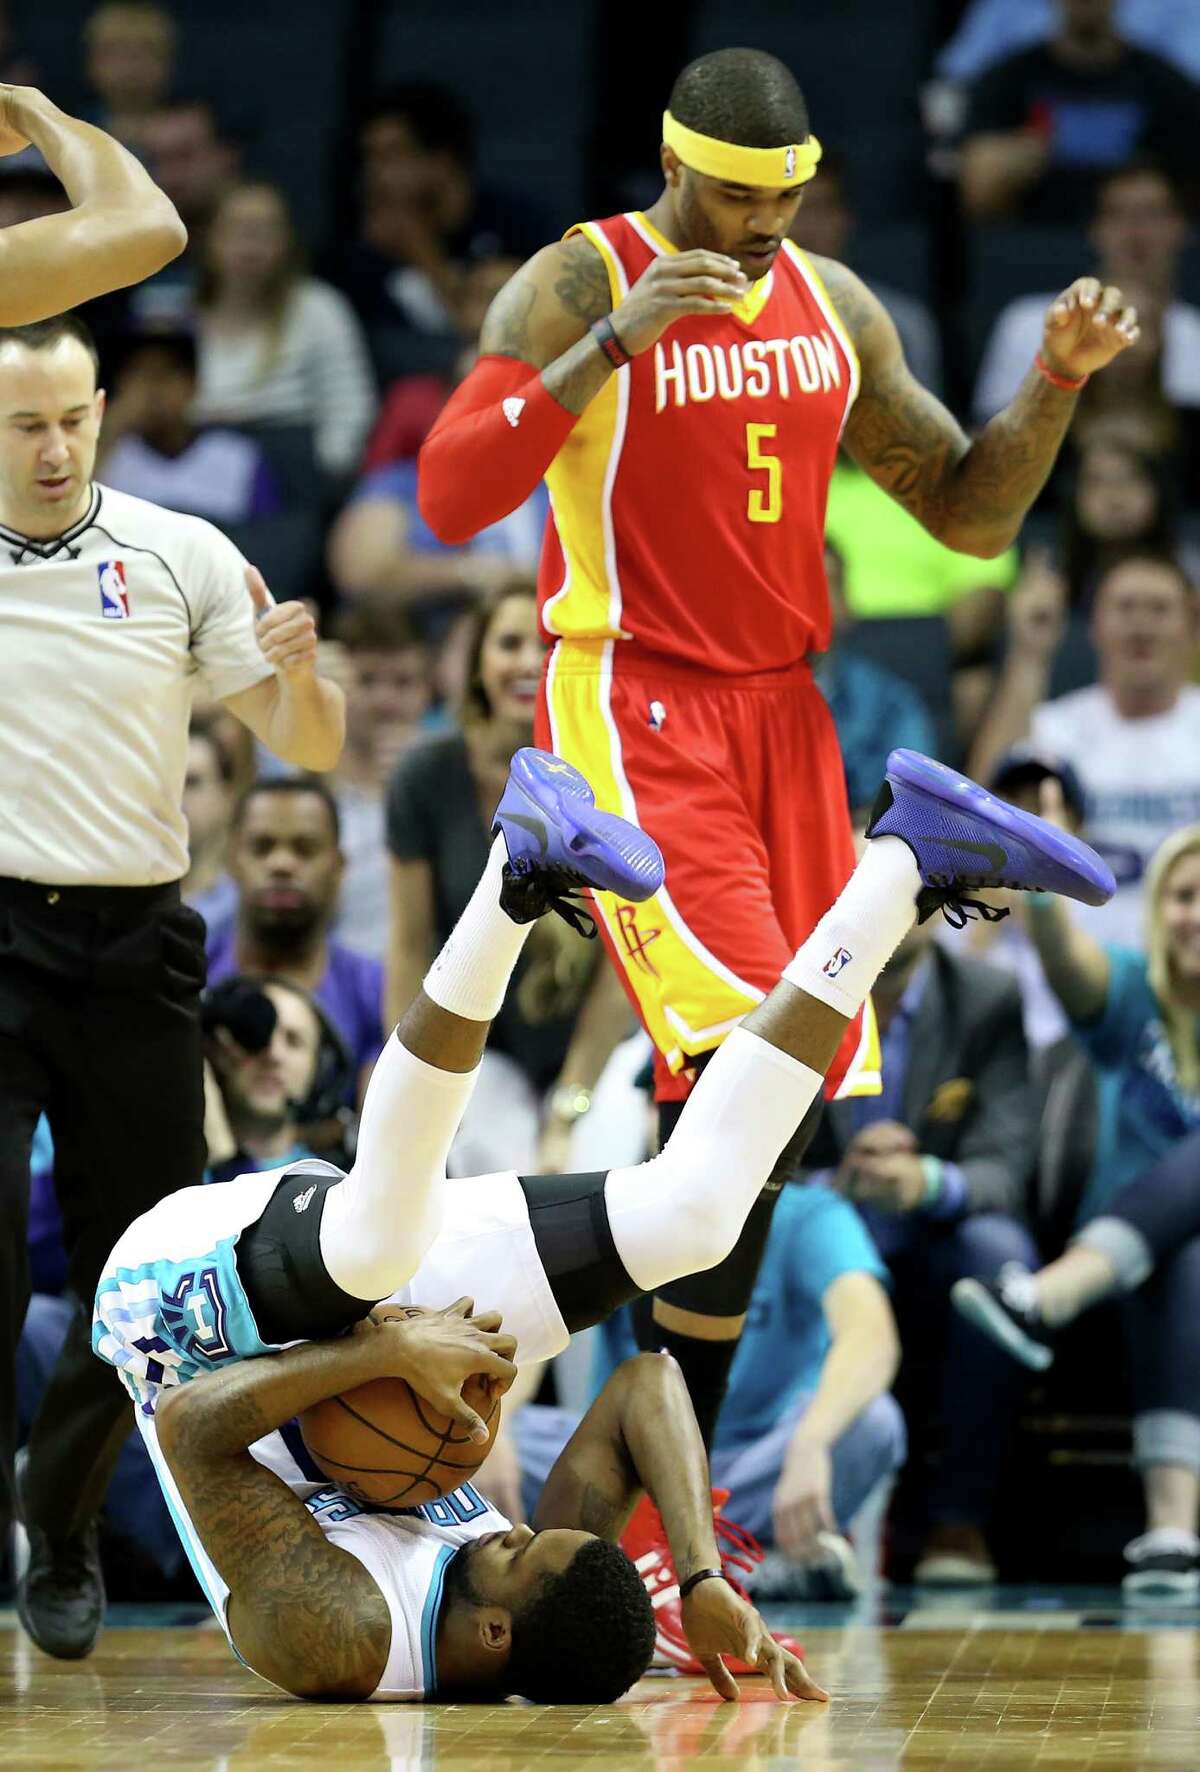 CHARLOTTE, NC - APRIL 13: Josh Smith #5 of the Houston Rockets watches as Troy Daniels #30 of the Charlotte Hornets falls back after a play during their game at Time Warner Cable Arena on April 13, 2015 in Charlotte, North Carolina. NOTE TO USER: User expressly acknowledges and agrees that, by downloading and or using this photograph, User is consenting to the terms and conditions of the Getty Images License Agreement. (Photo by Streeter Lecka/Getty Images)